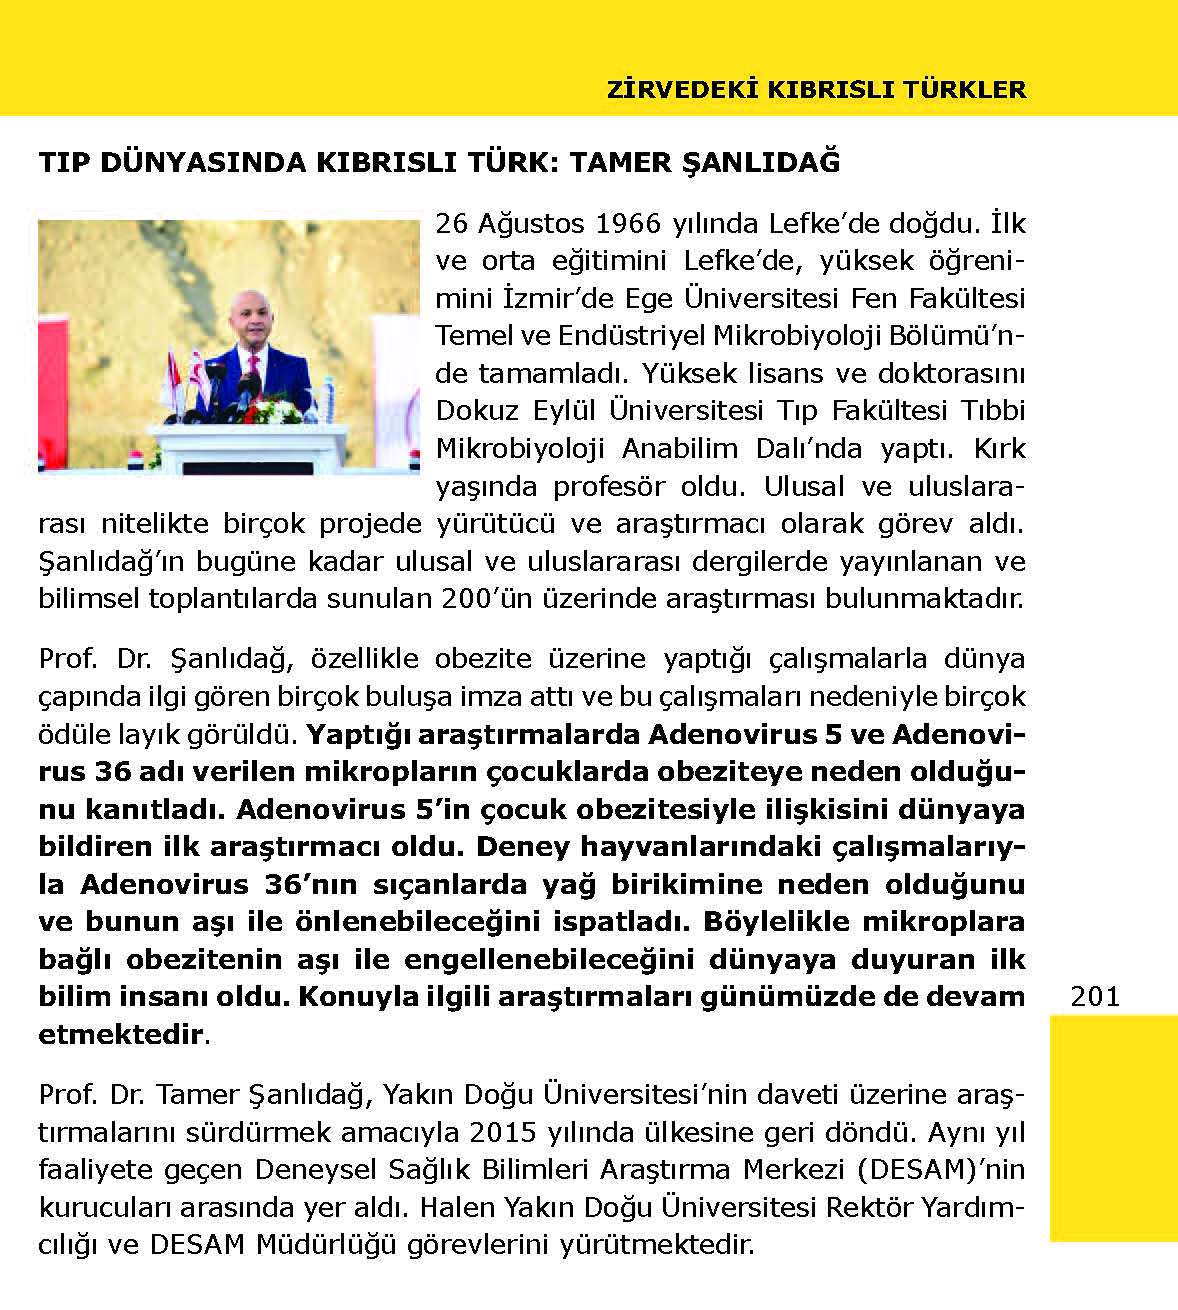 Vice Rector of Near East University Prof. Dr. Tamer Şanlıdağ was named in a Technology and Design Book among the “Turkish Cypriots Reaching the Peak of Success”